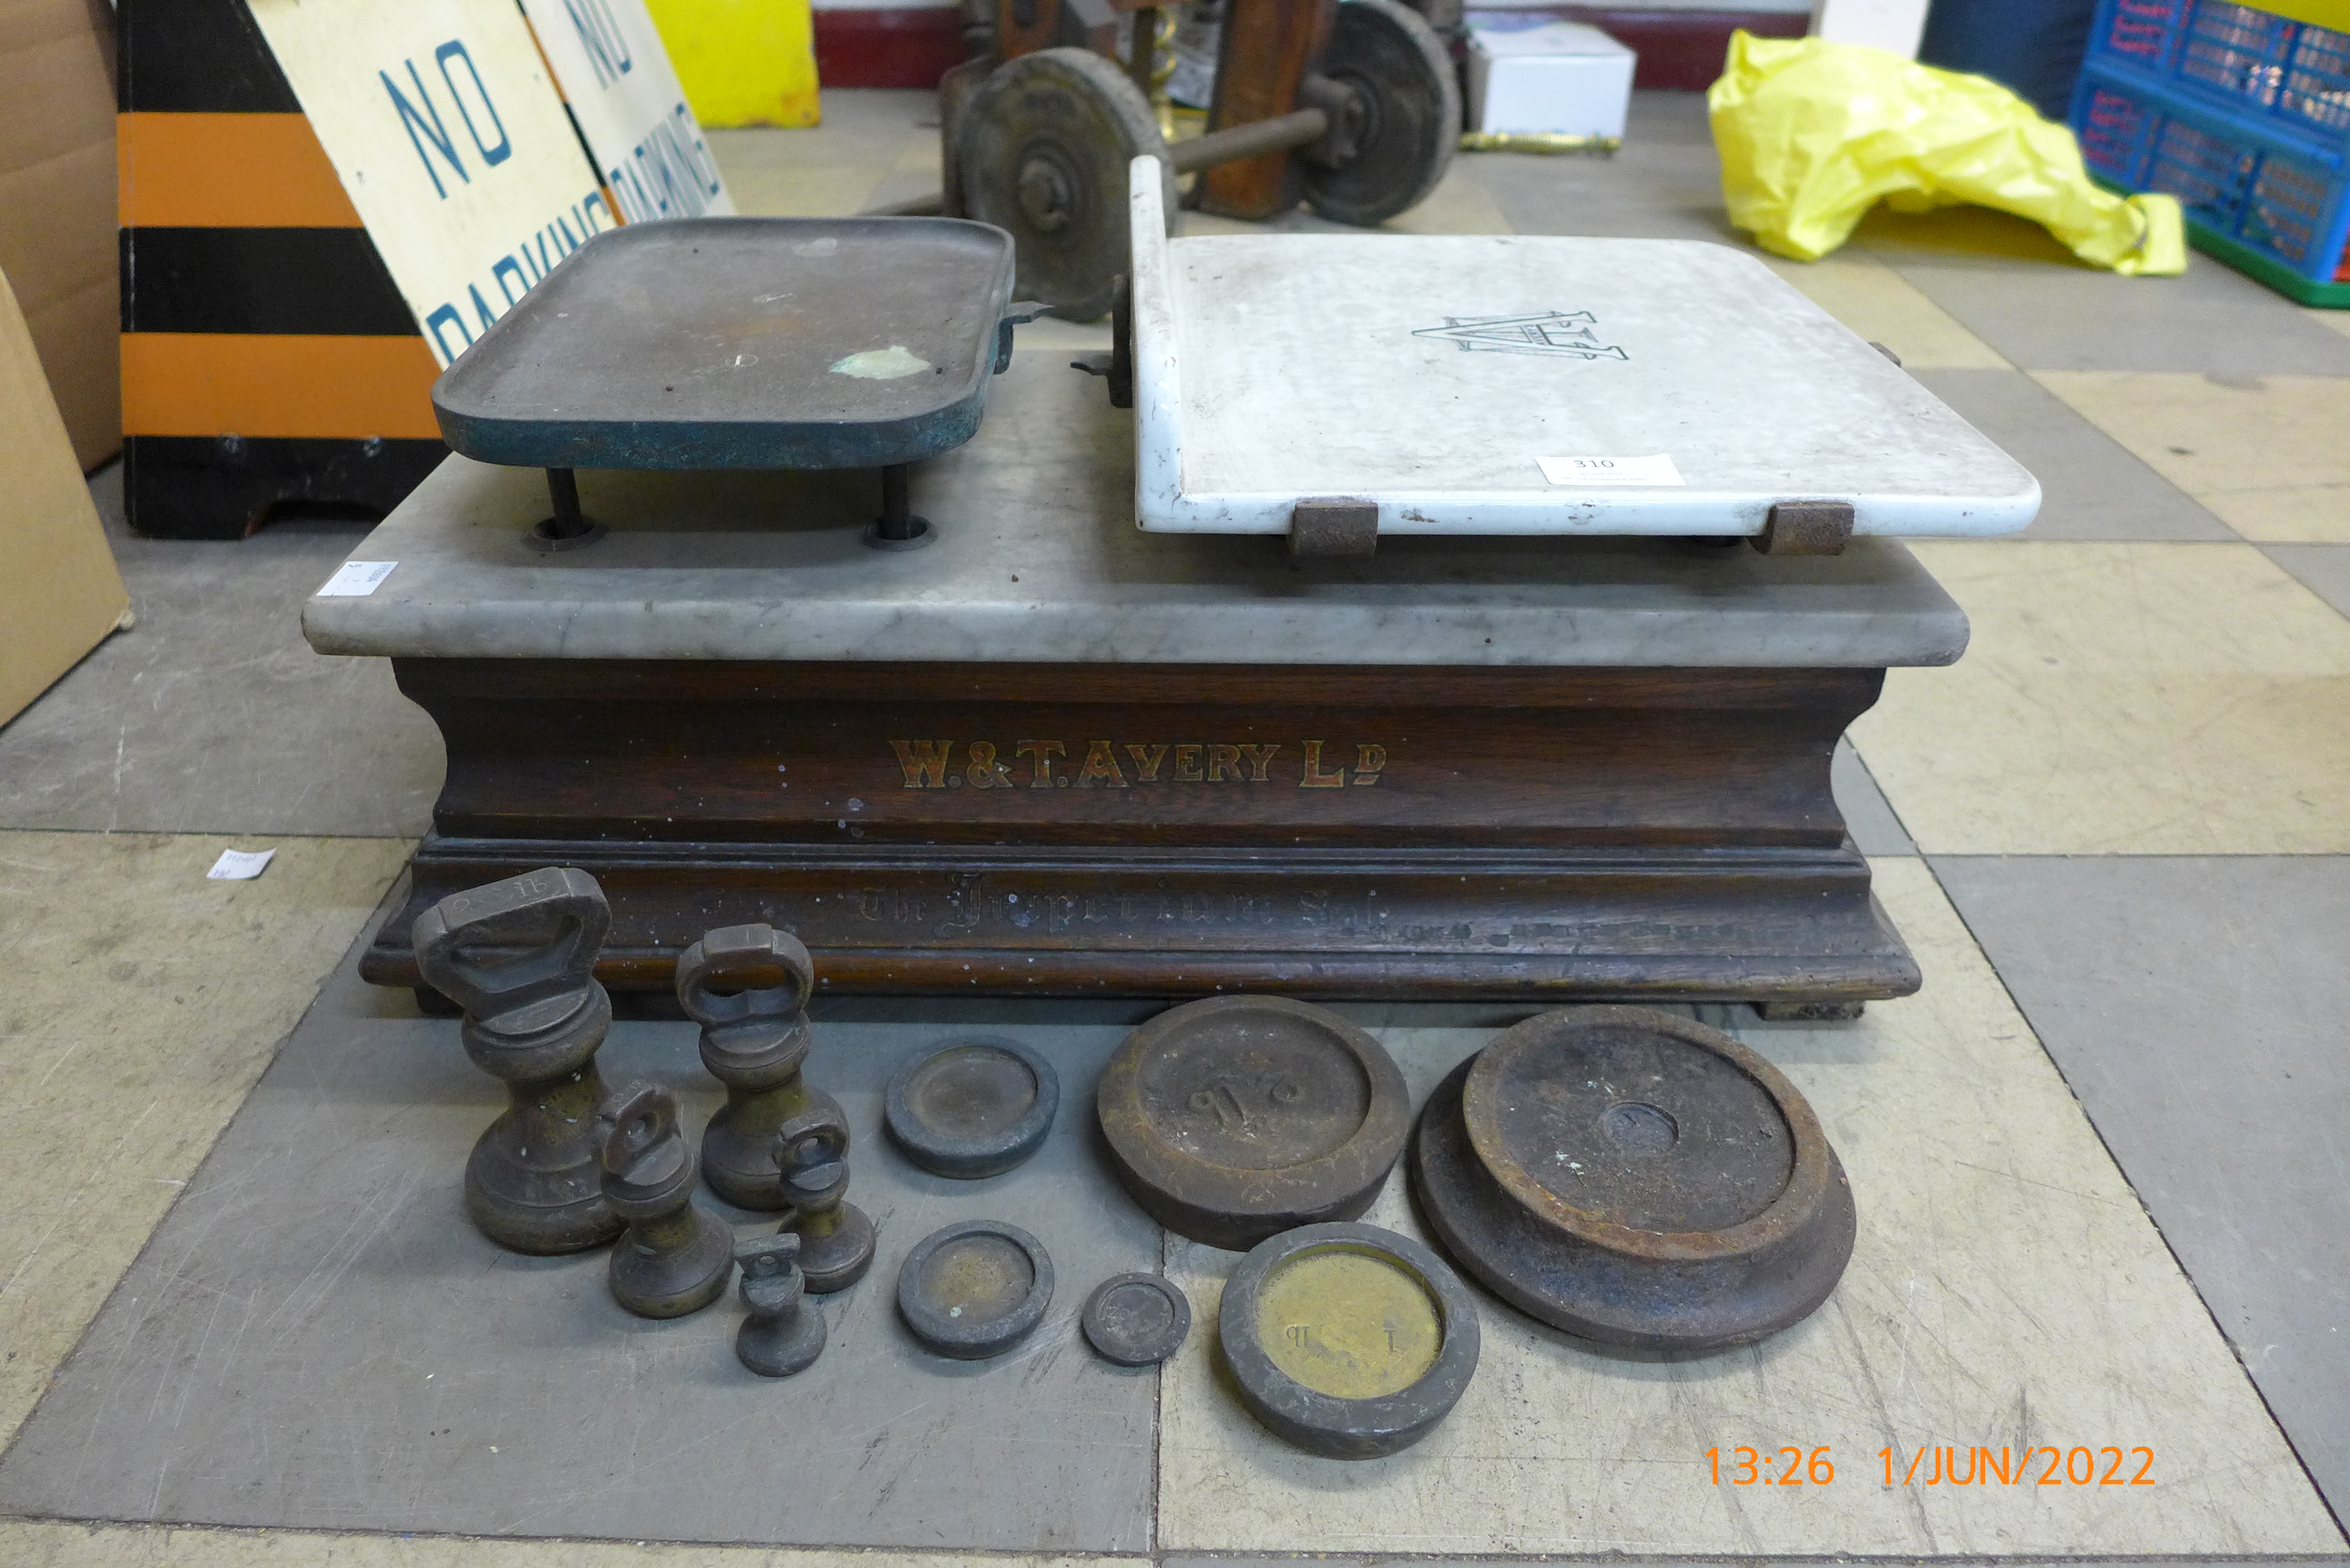 A set of vintage scales with weights, W & T Avery Ld